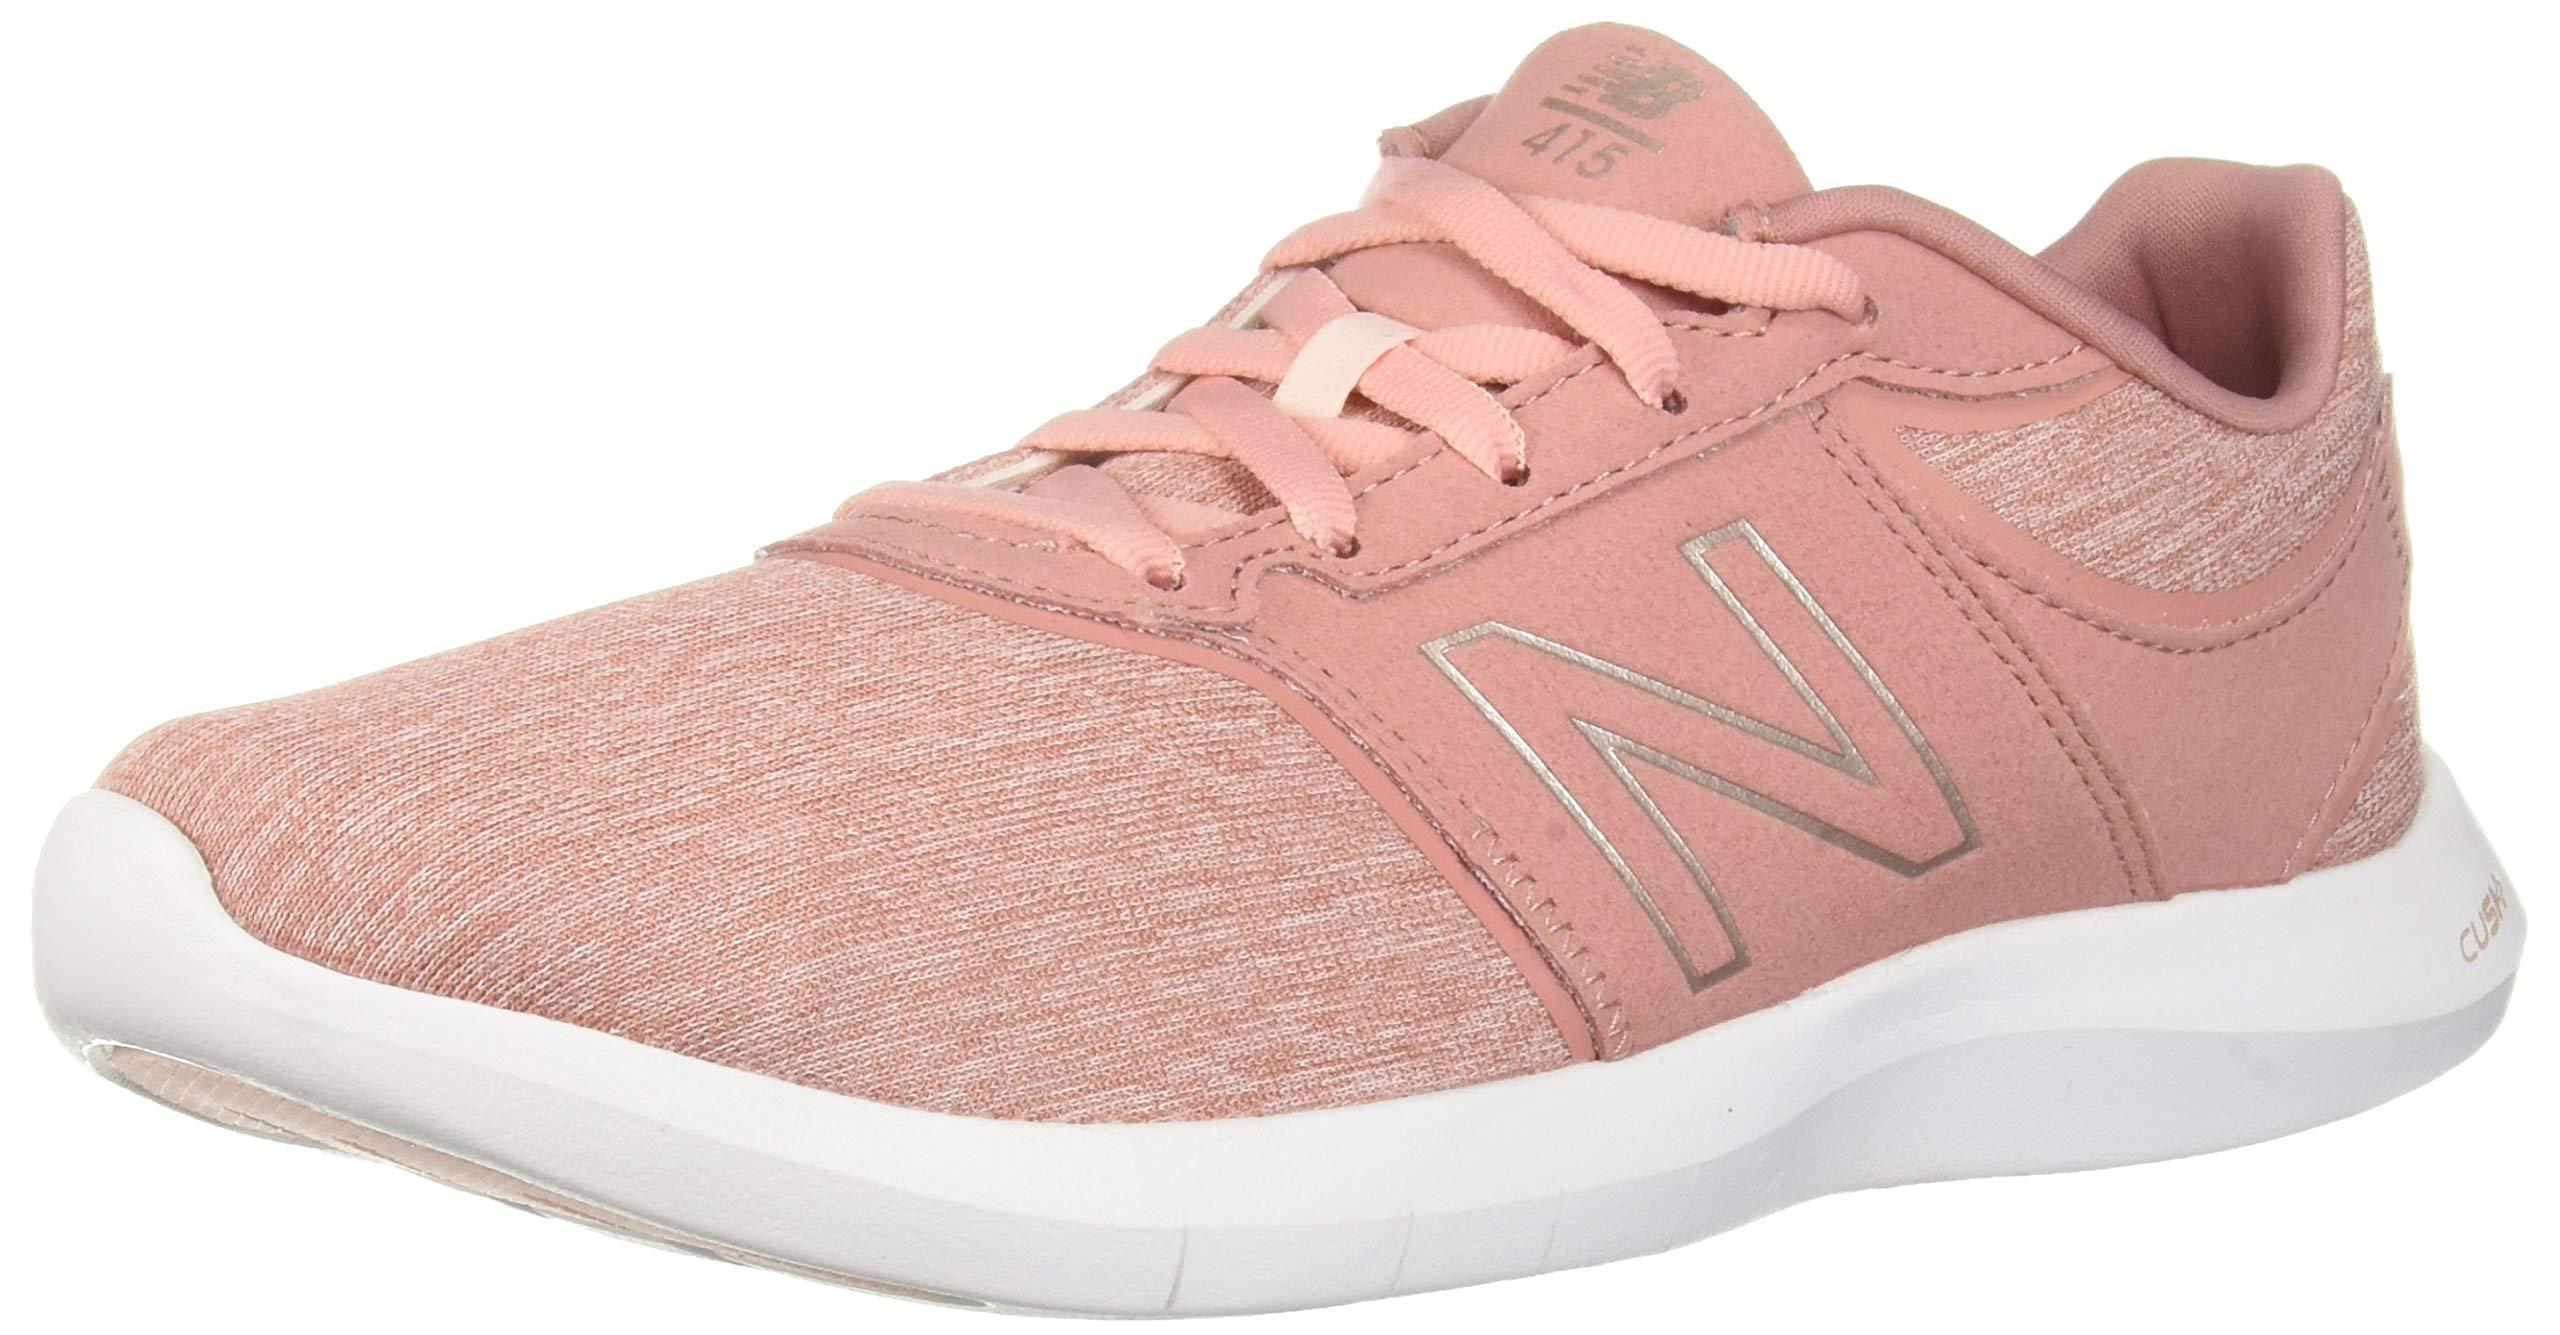 New Balance 415v1 Cush Sneaker in Pink - Save 66% - Lyst